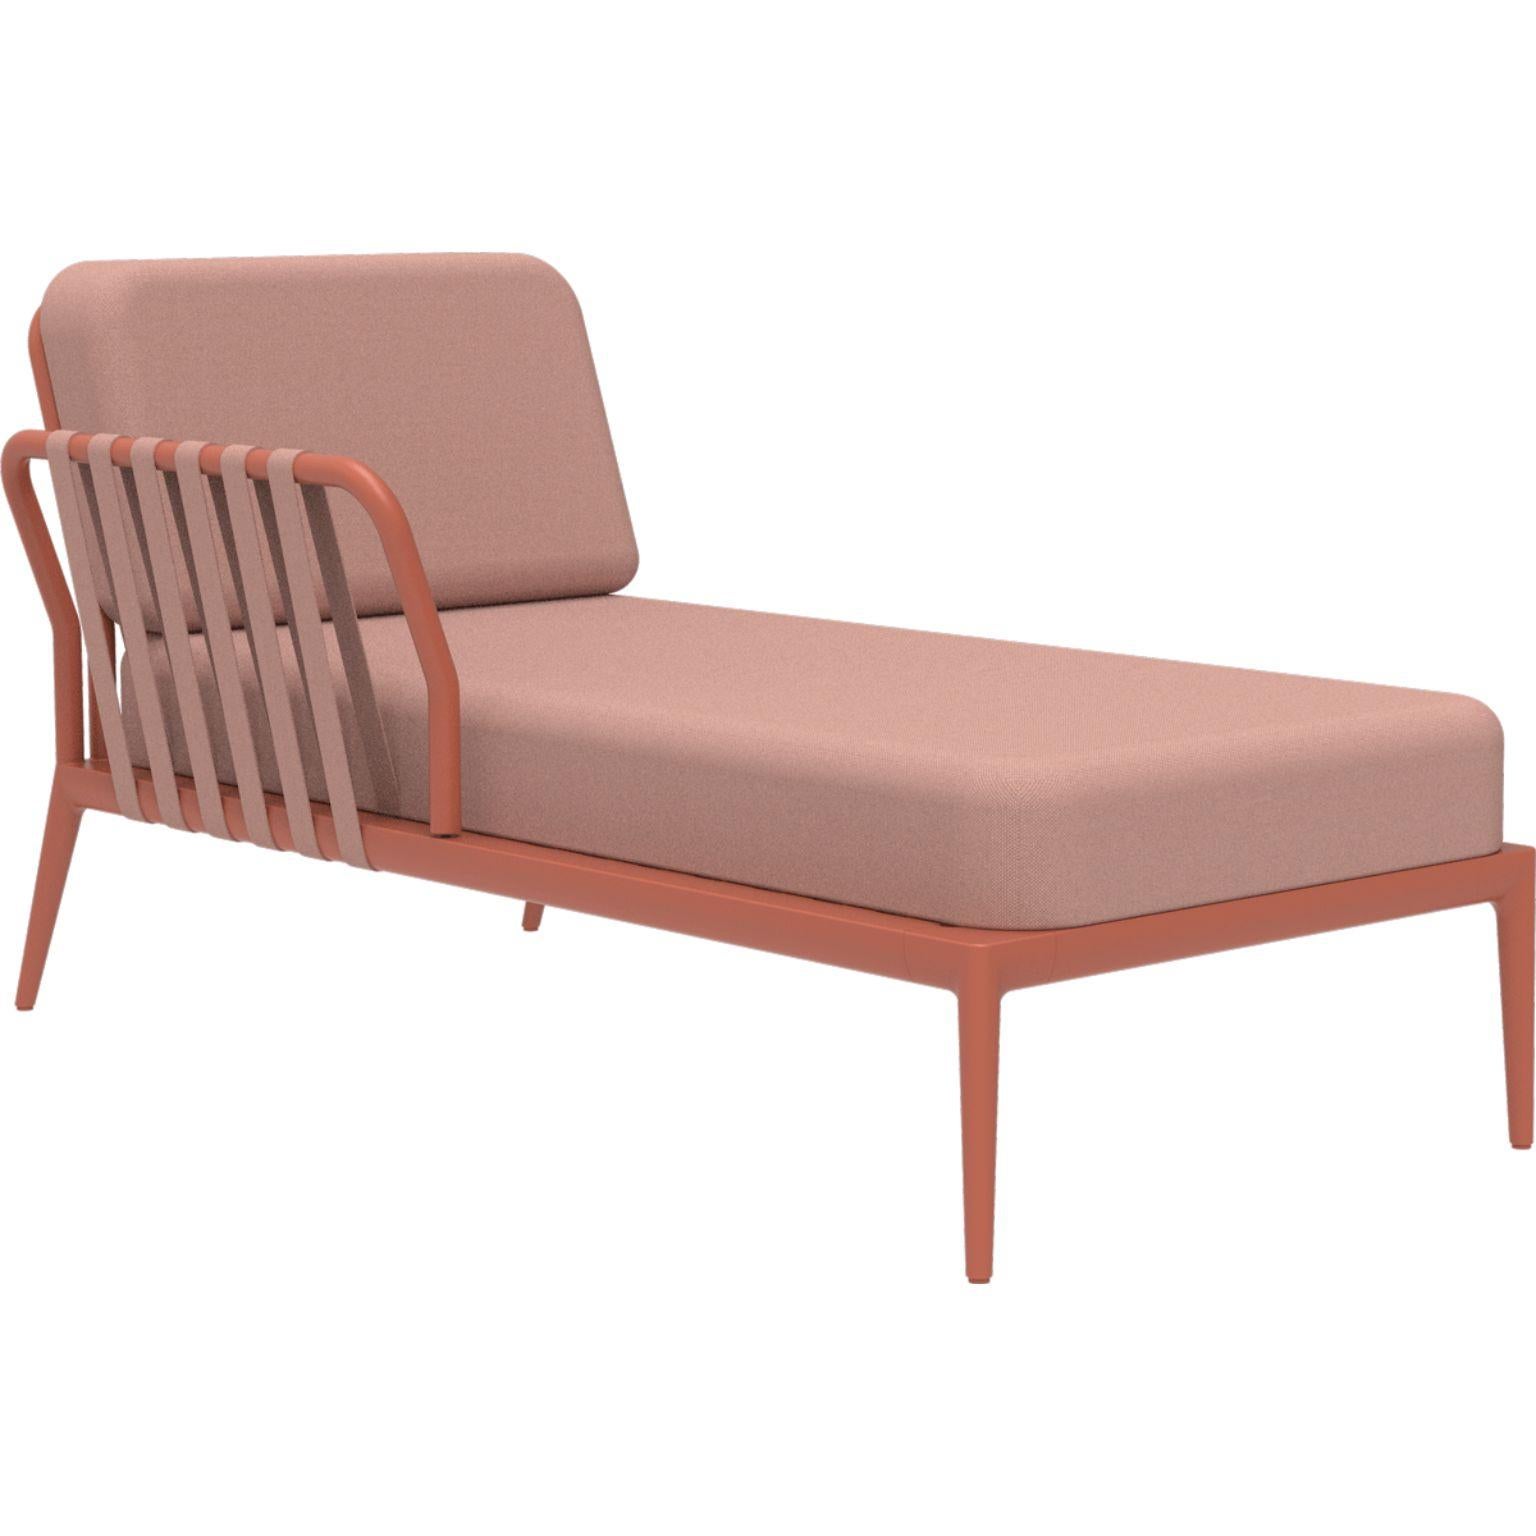 Ribbons Salmon Right Chaise longue by MOWEE
Dimensions: D80 x W155 x H81 cm
Material: Aluminum, Upholstery
Weight: 28 kg
Also Available in different colors and finishes. 

An unmistakable collection for its beauty and robustness. A tribute to